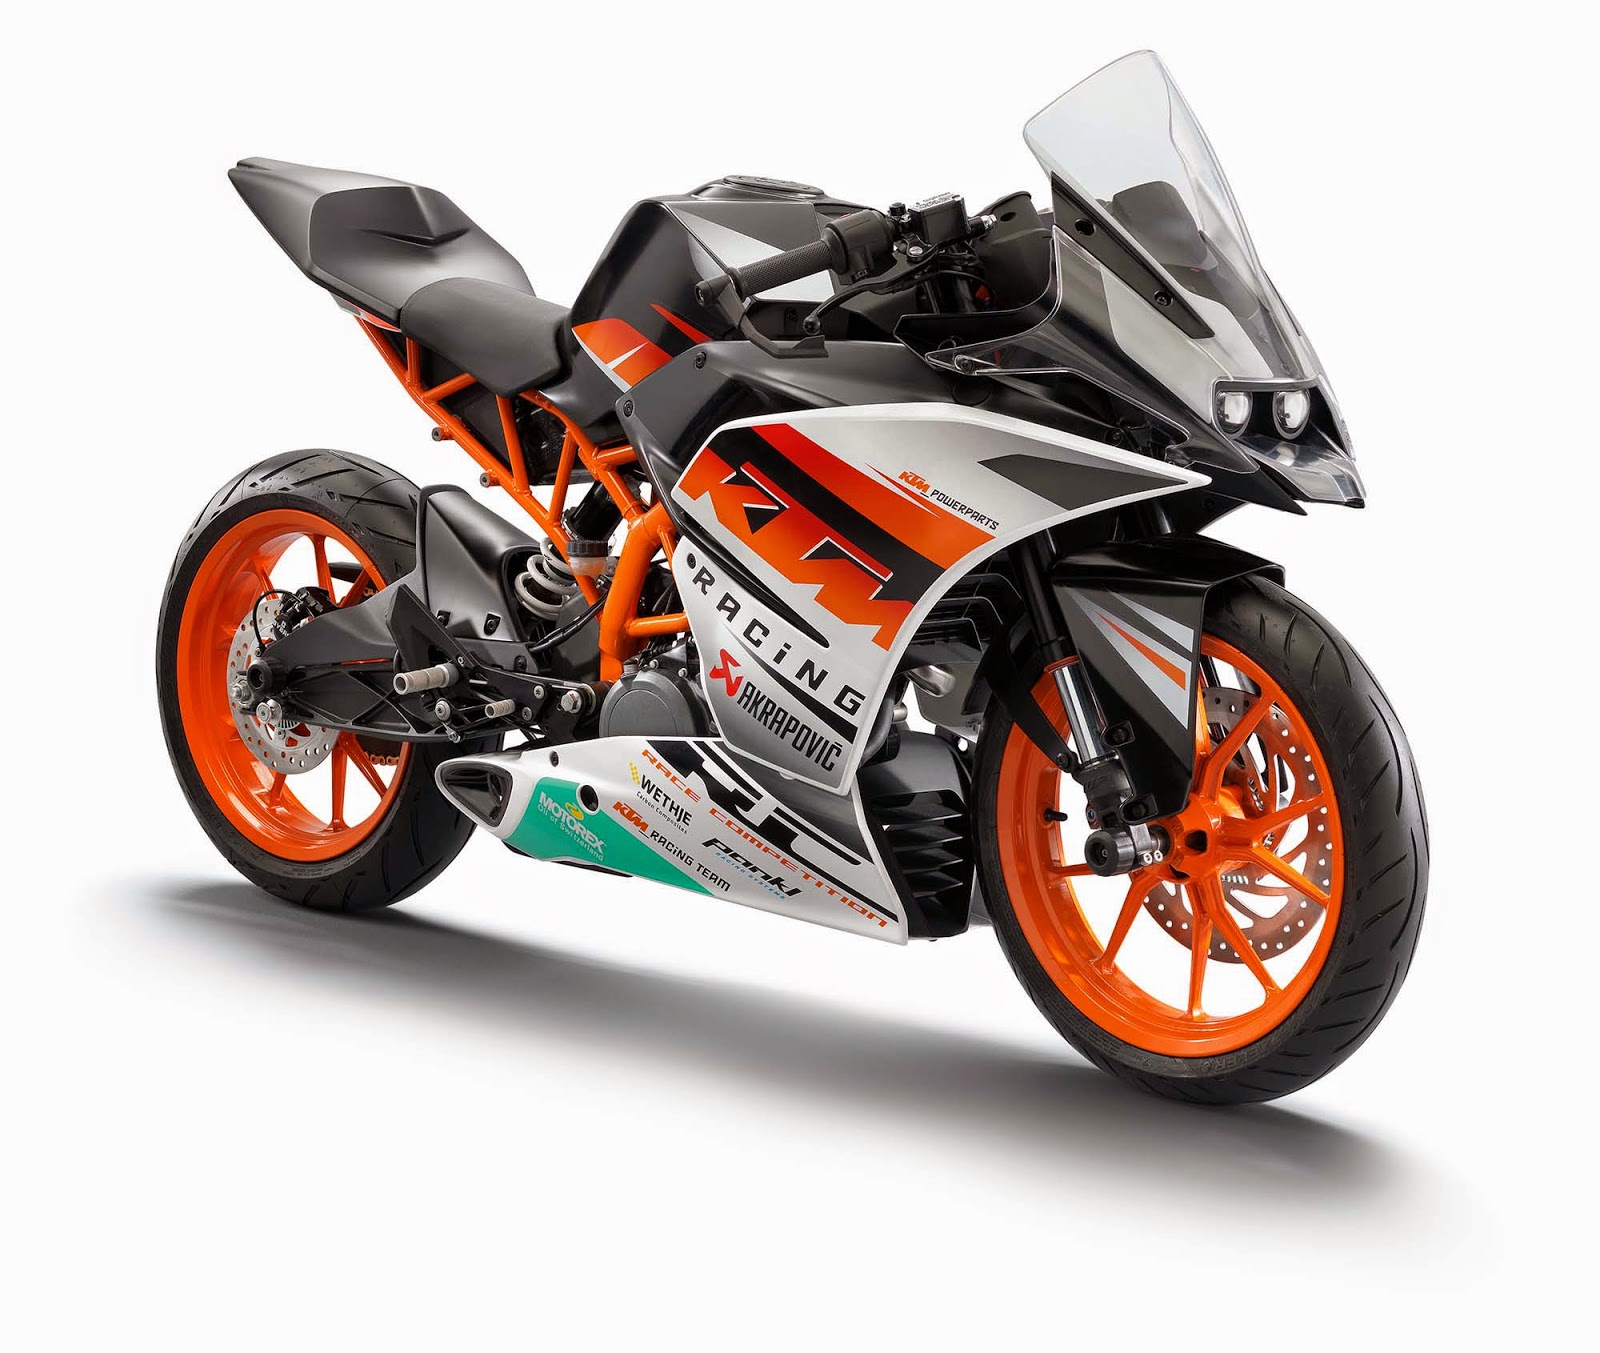 powerful-riding-machines-ktm-rc-390-a-middleweight-super-sports